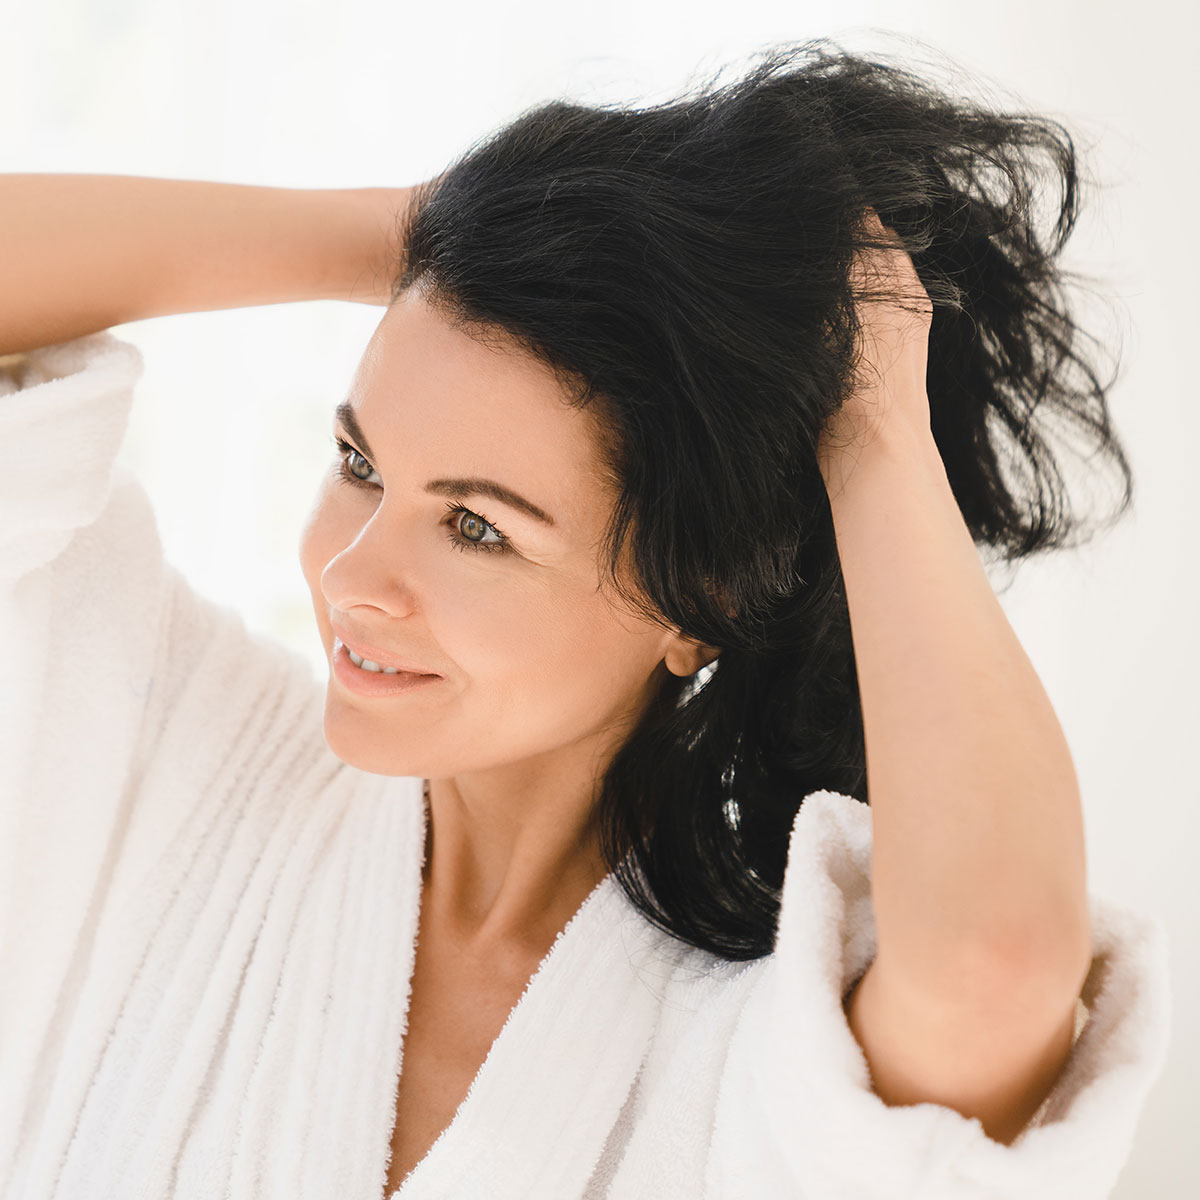 3 Tips For Growing Thicker, Longer Hair Over 40, According To Experts -  SHEfinds